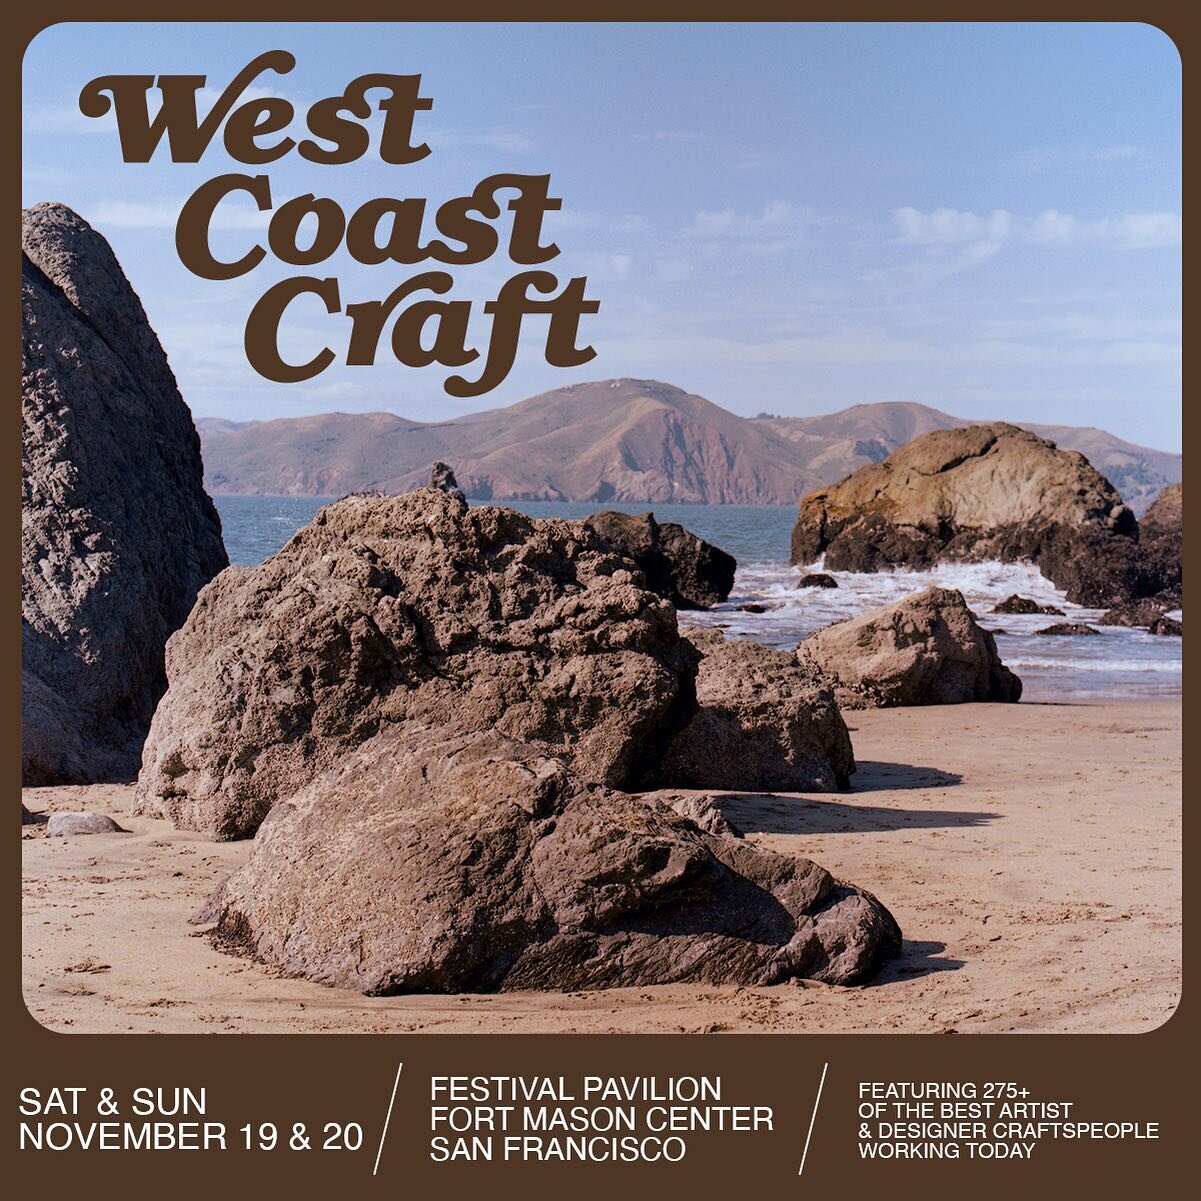 Join us for a fun weekend at Fort Mason for @westcoastcraft! We&rsquo;ll be hanging out from 10am to 6pm with all the pillows and blankets. Can&rsquo;t wait to see you all ✨